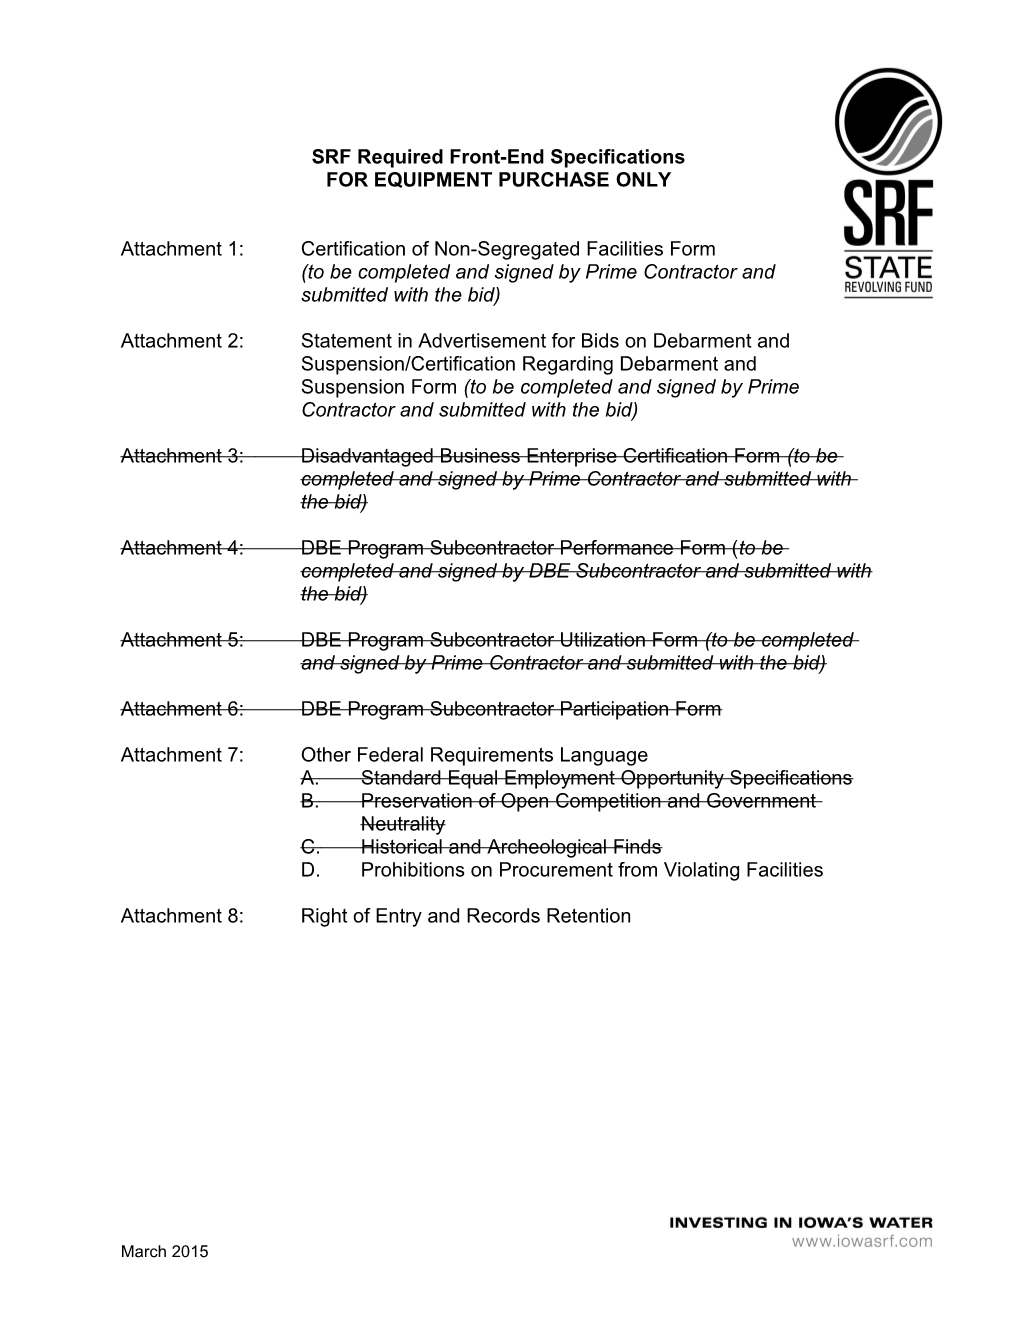 SRF Required Front-End Specifications